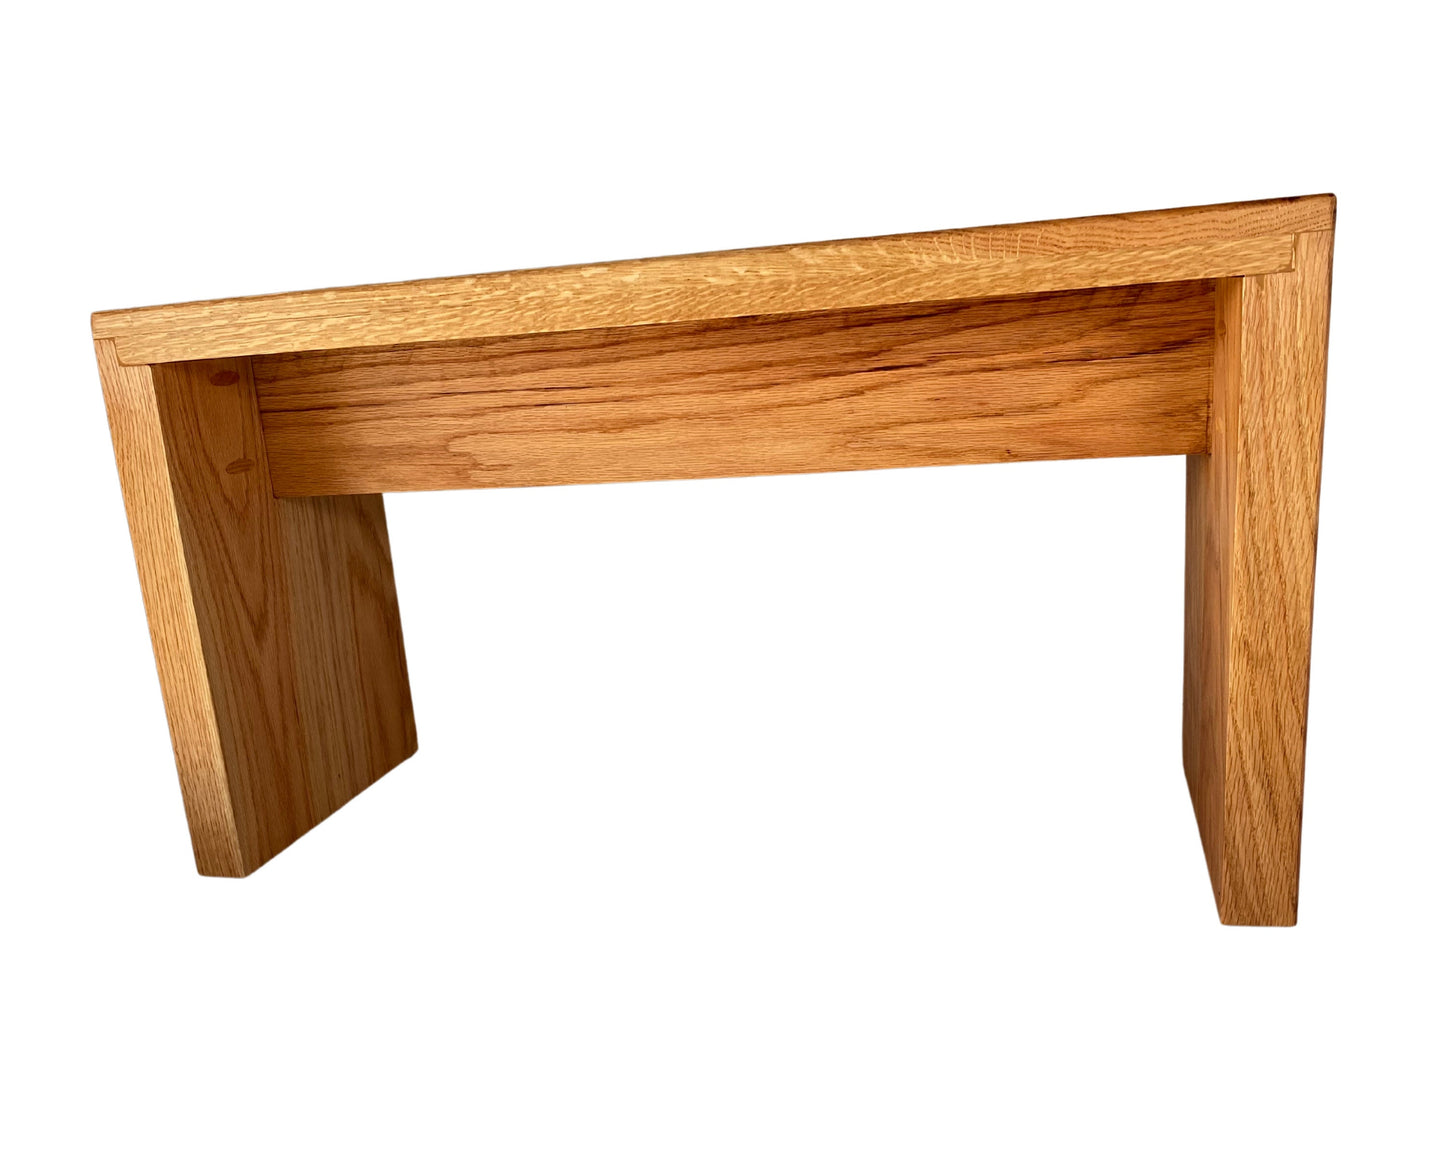 Natural Oak Wood Bench for Entryway, Minimalist Handmade Shoe Bench, Solid Oak Wood Bench Seat for Home